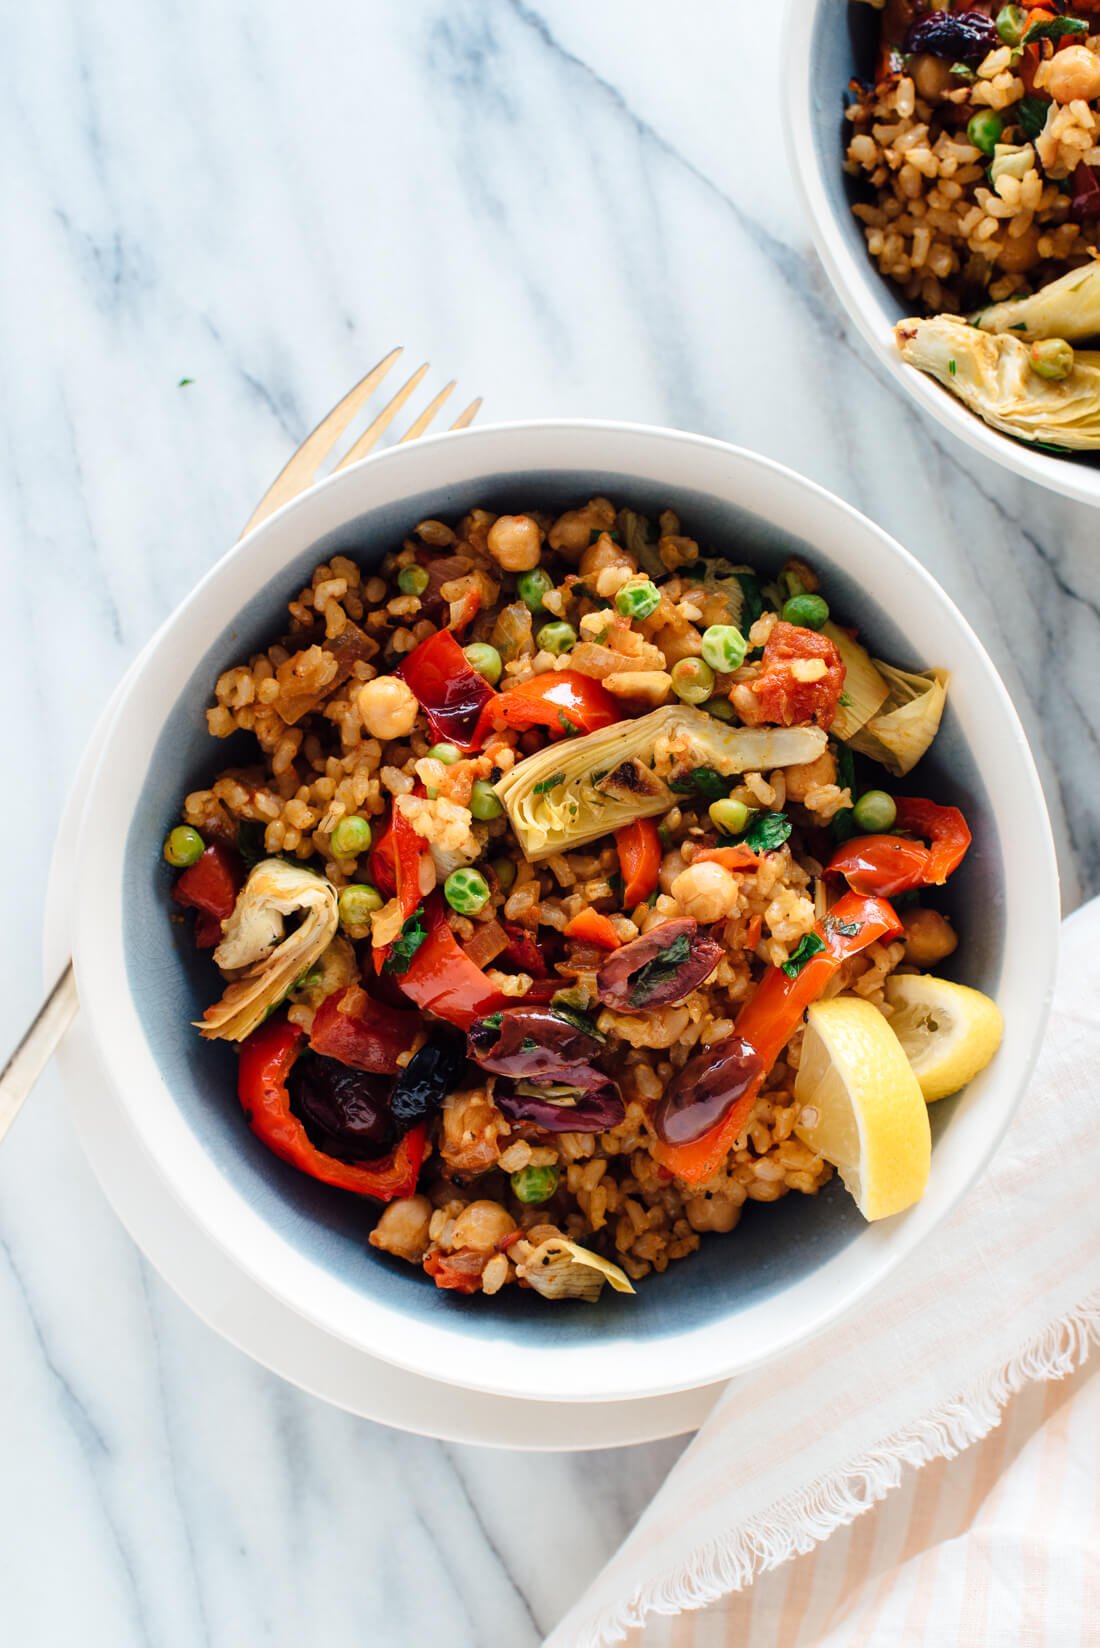 The best vegetable paella recipe! It's loaded with vegetables, chickpeas, and savory spiced rice.